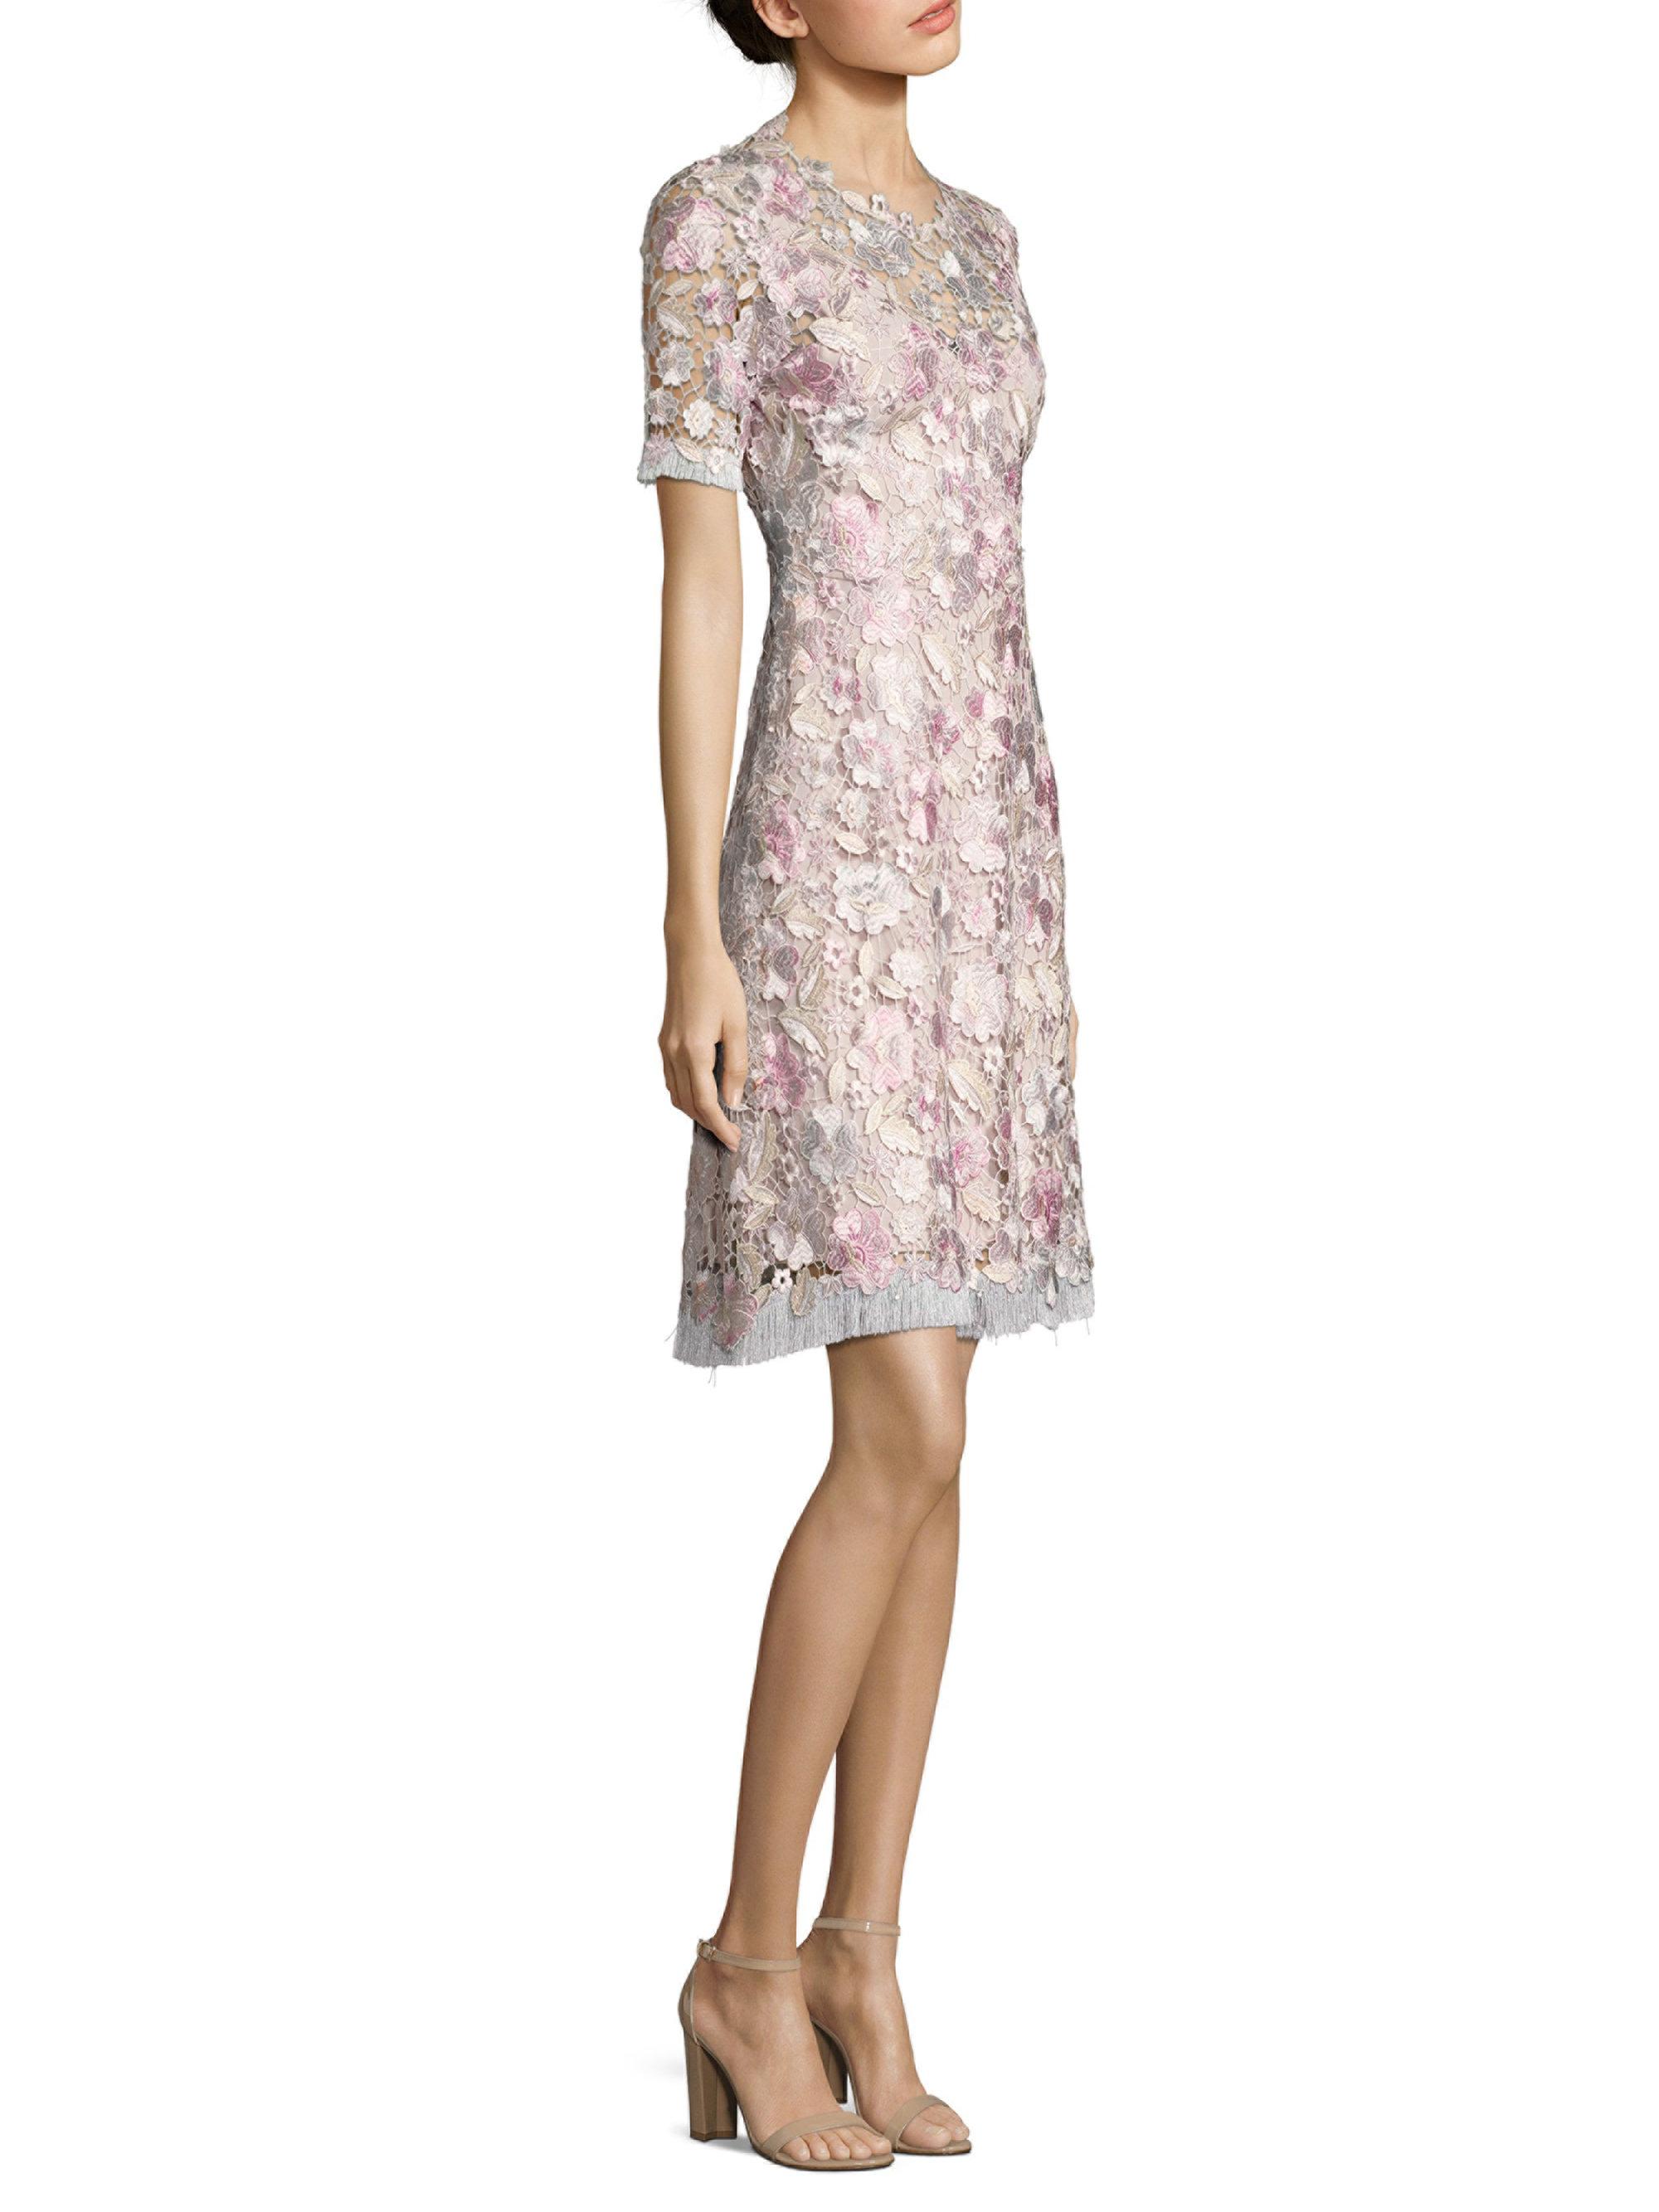 Elie Tahari Laura Floral Lace A-line Dress in Pink - Lyst